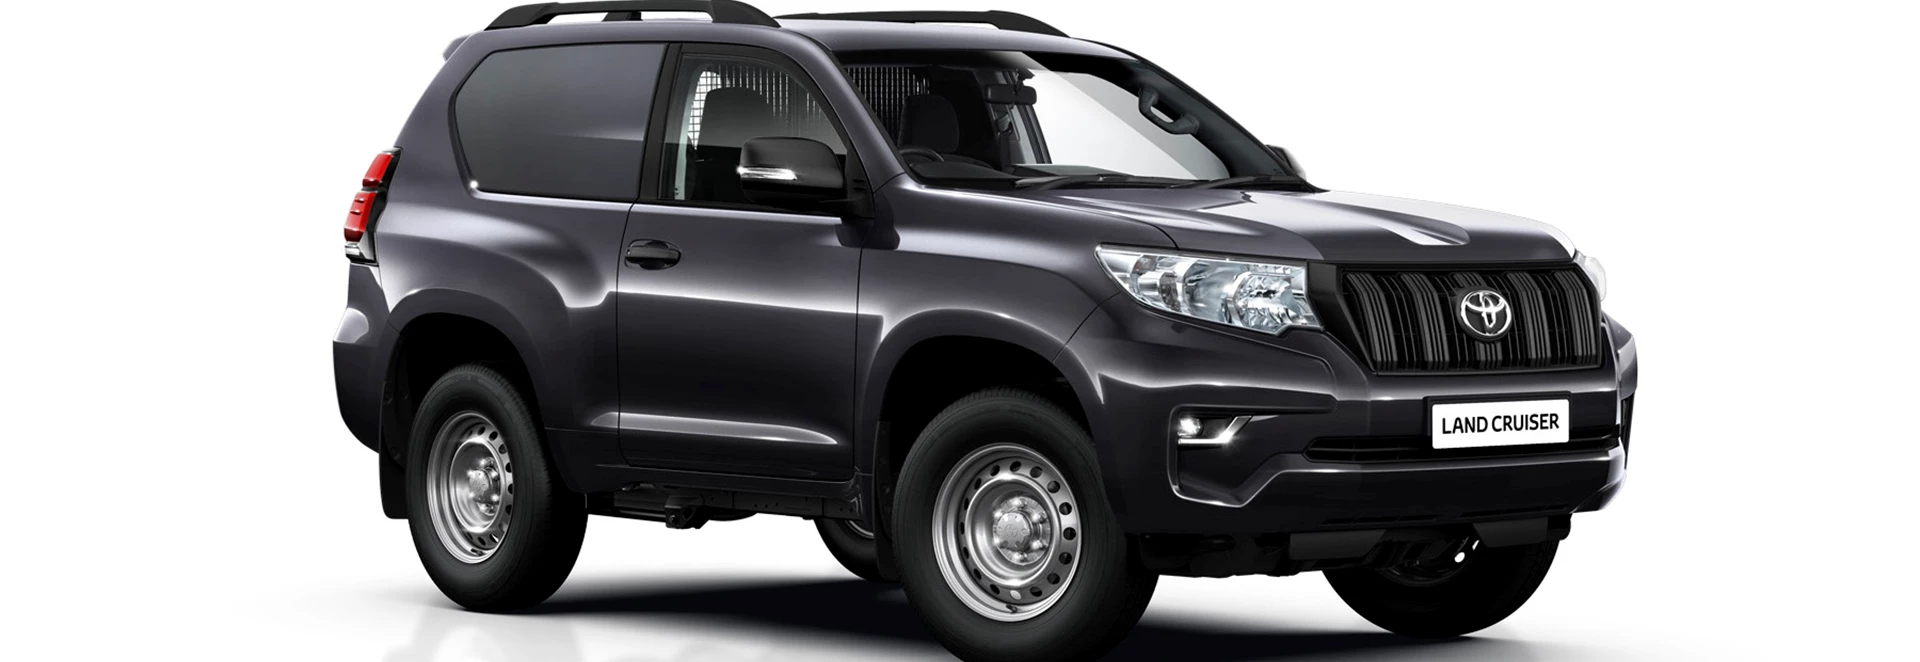 Toyota reveals Land Cruiser Utility commercial vehicle